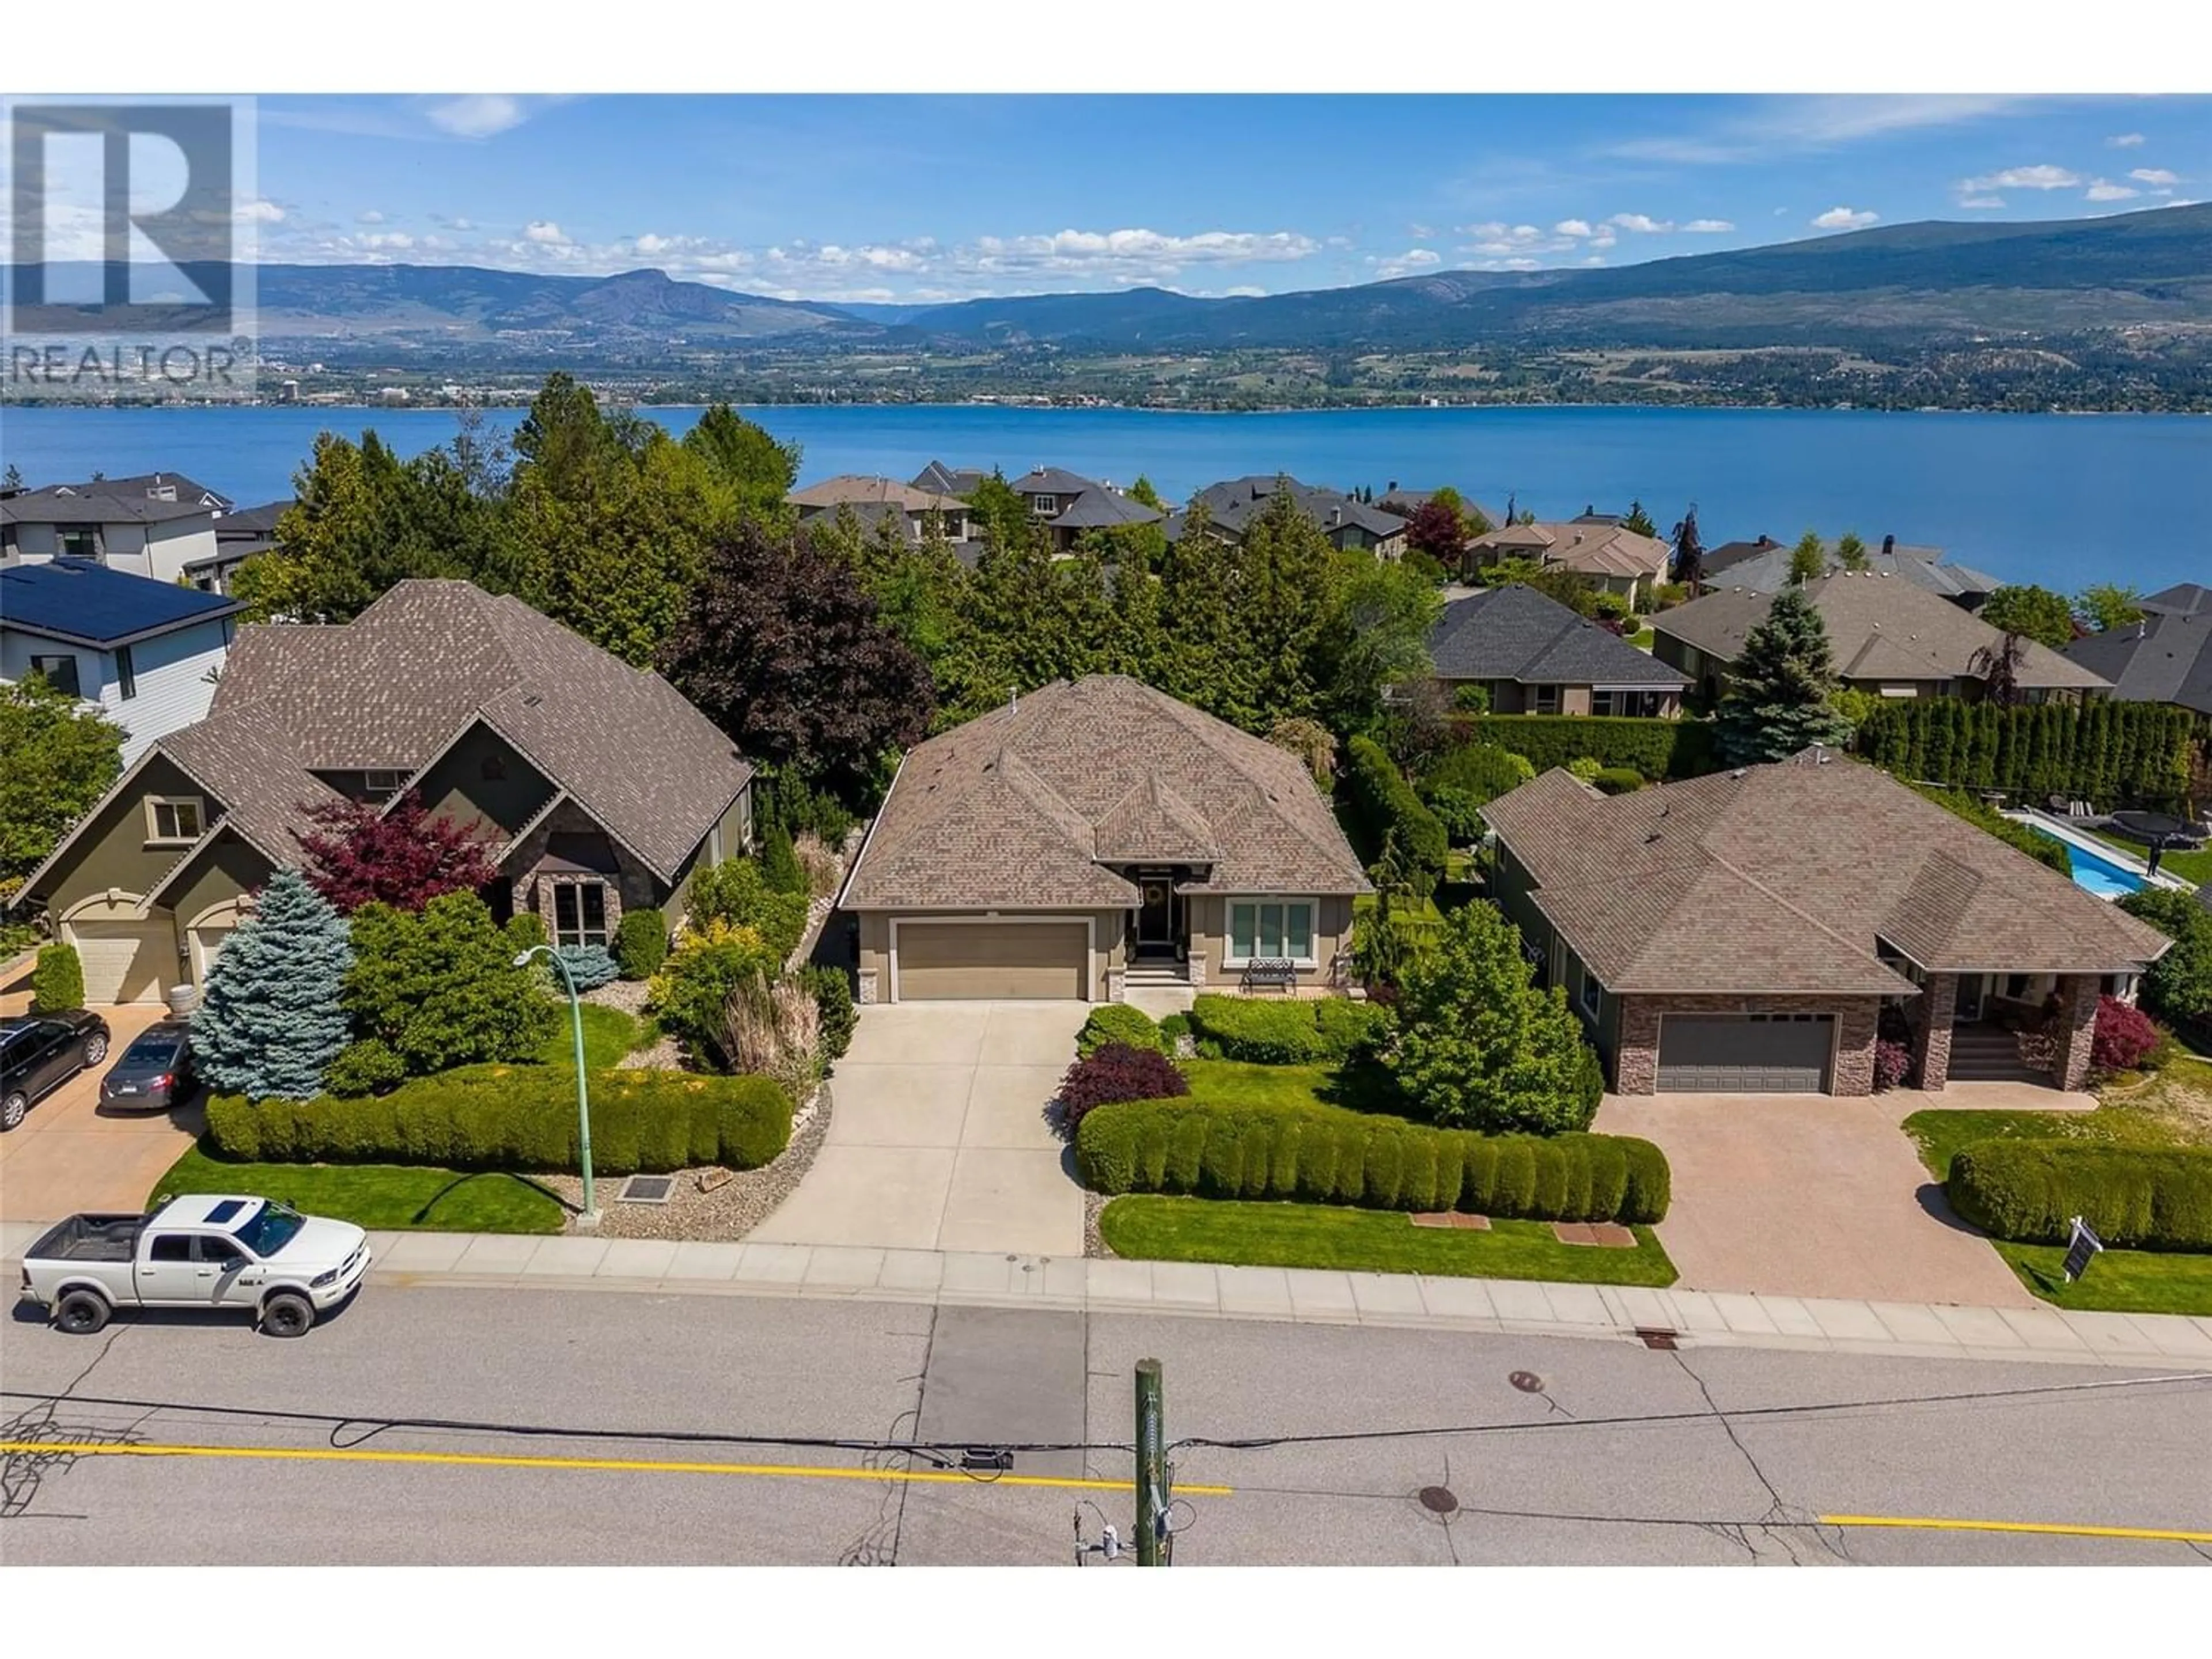 Lakeview for 3071 Thacker Drive, West Kelowna British Columbia V1Z1X5